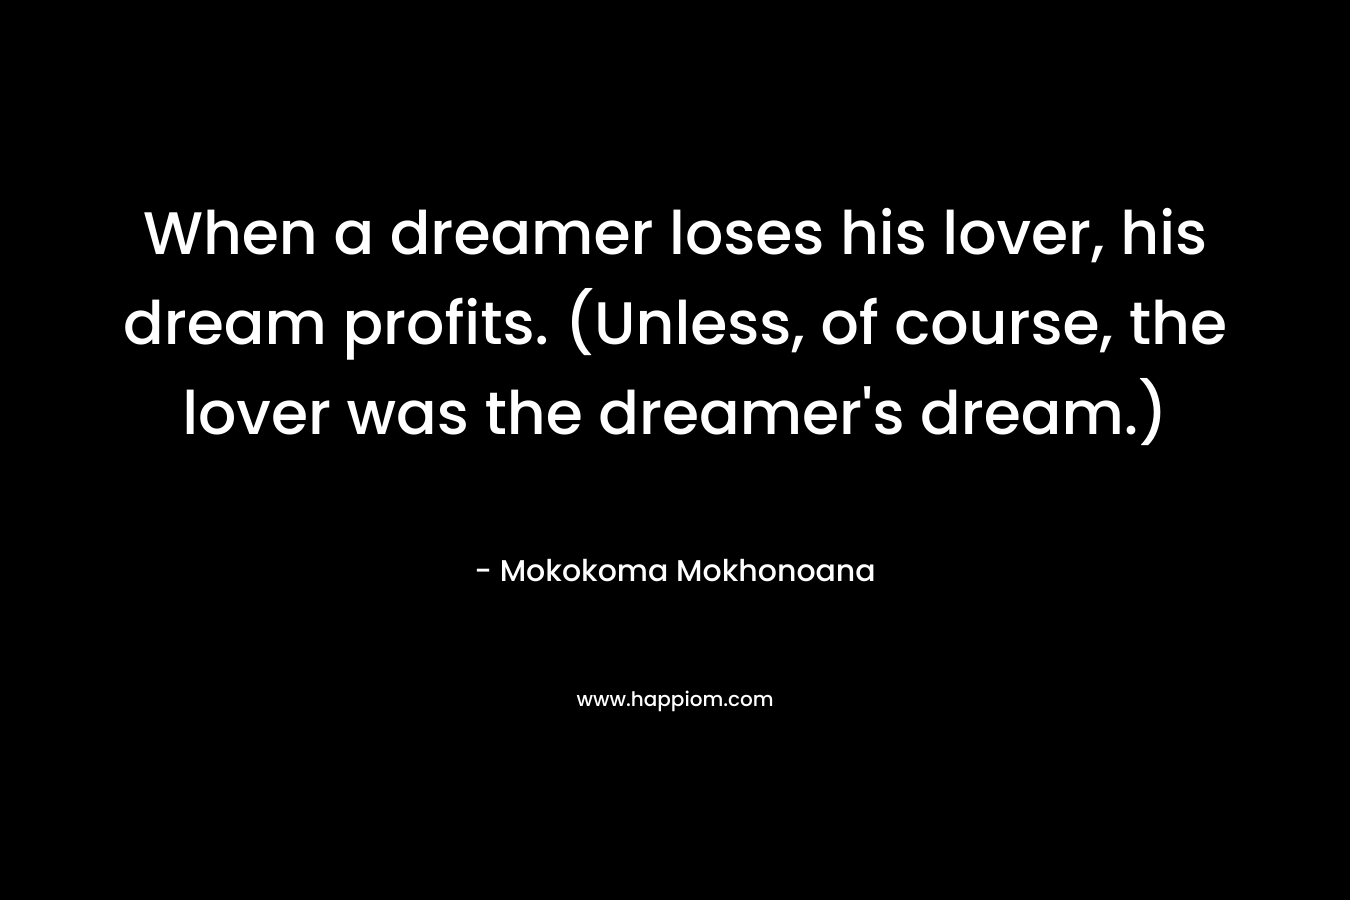 When a dreamer loses his lover, his dream profits. (Unless, of course, the lover was the dreamer's dream.)